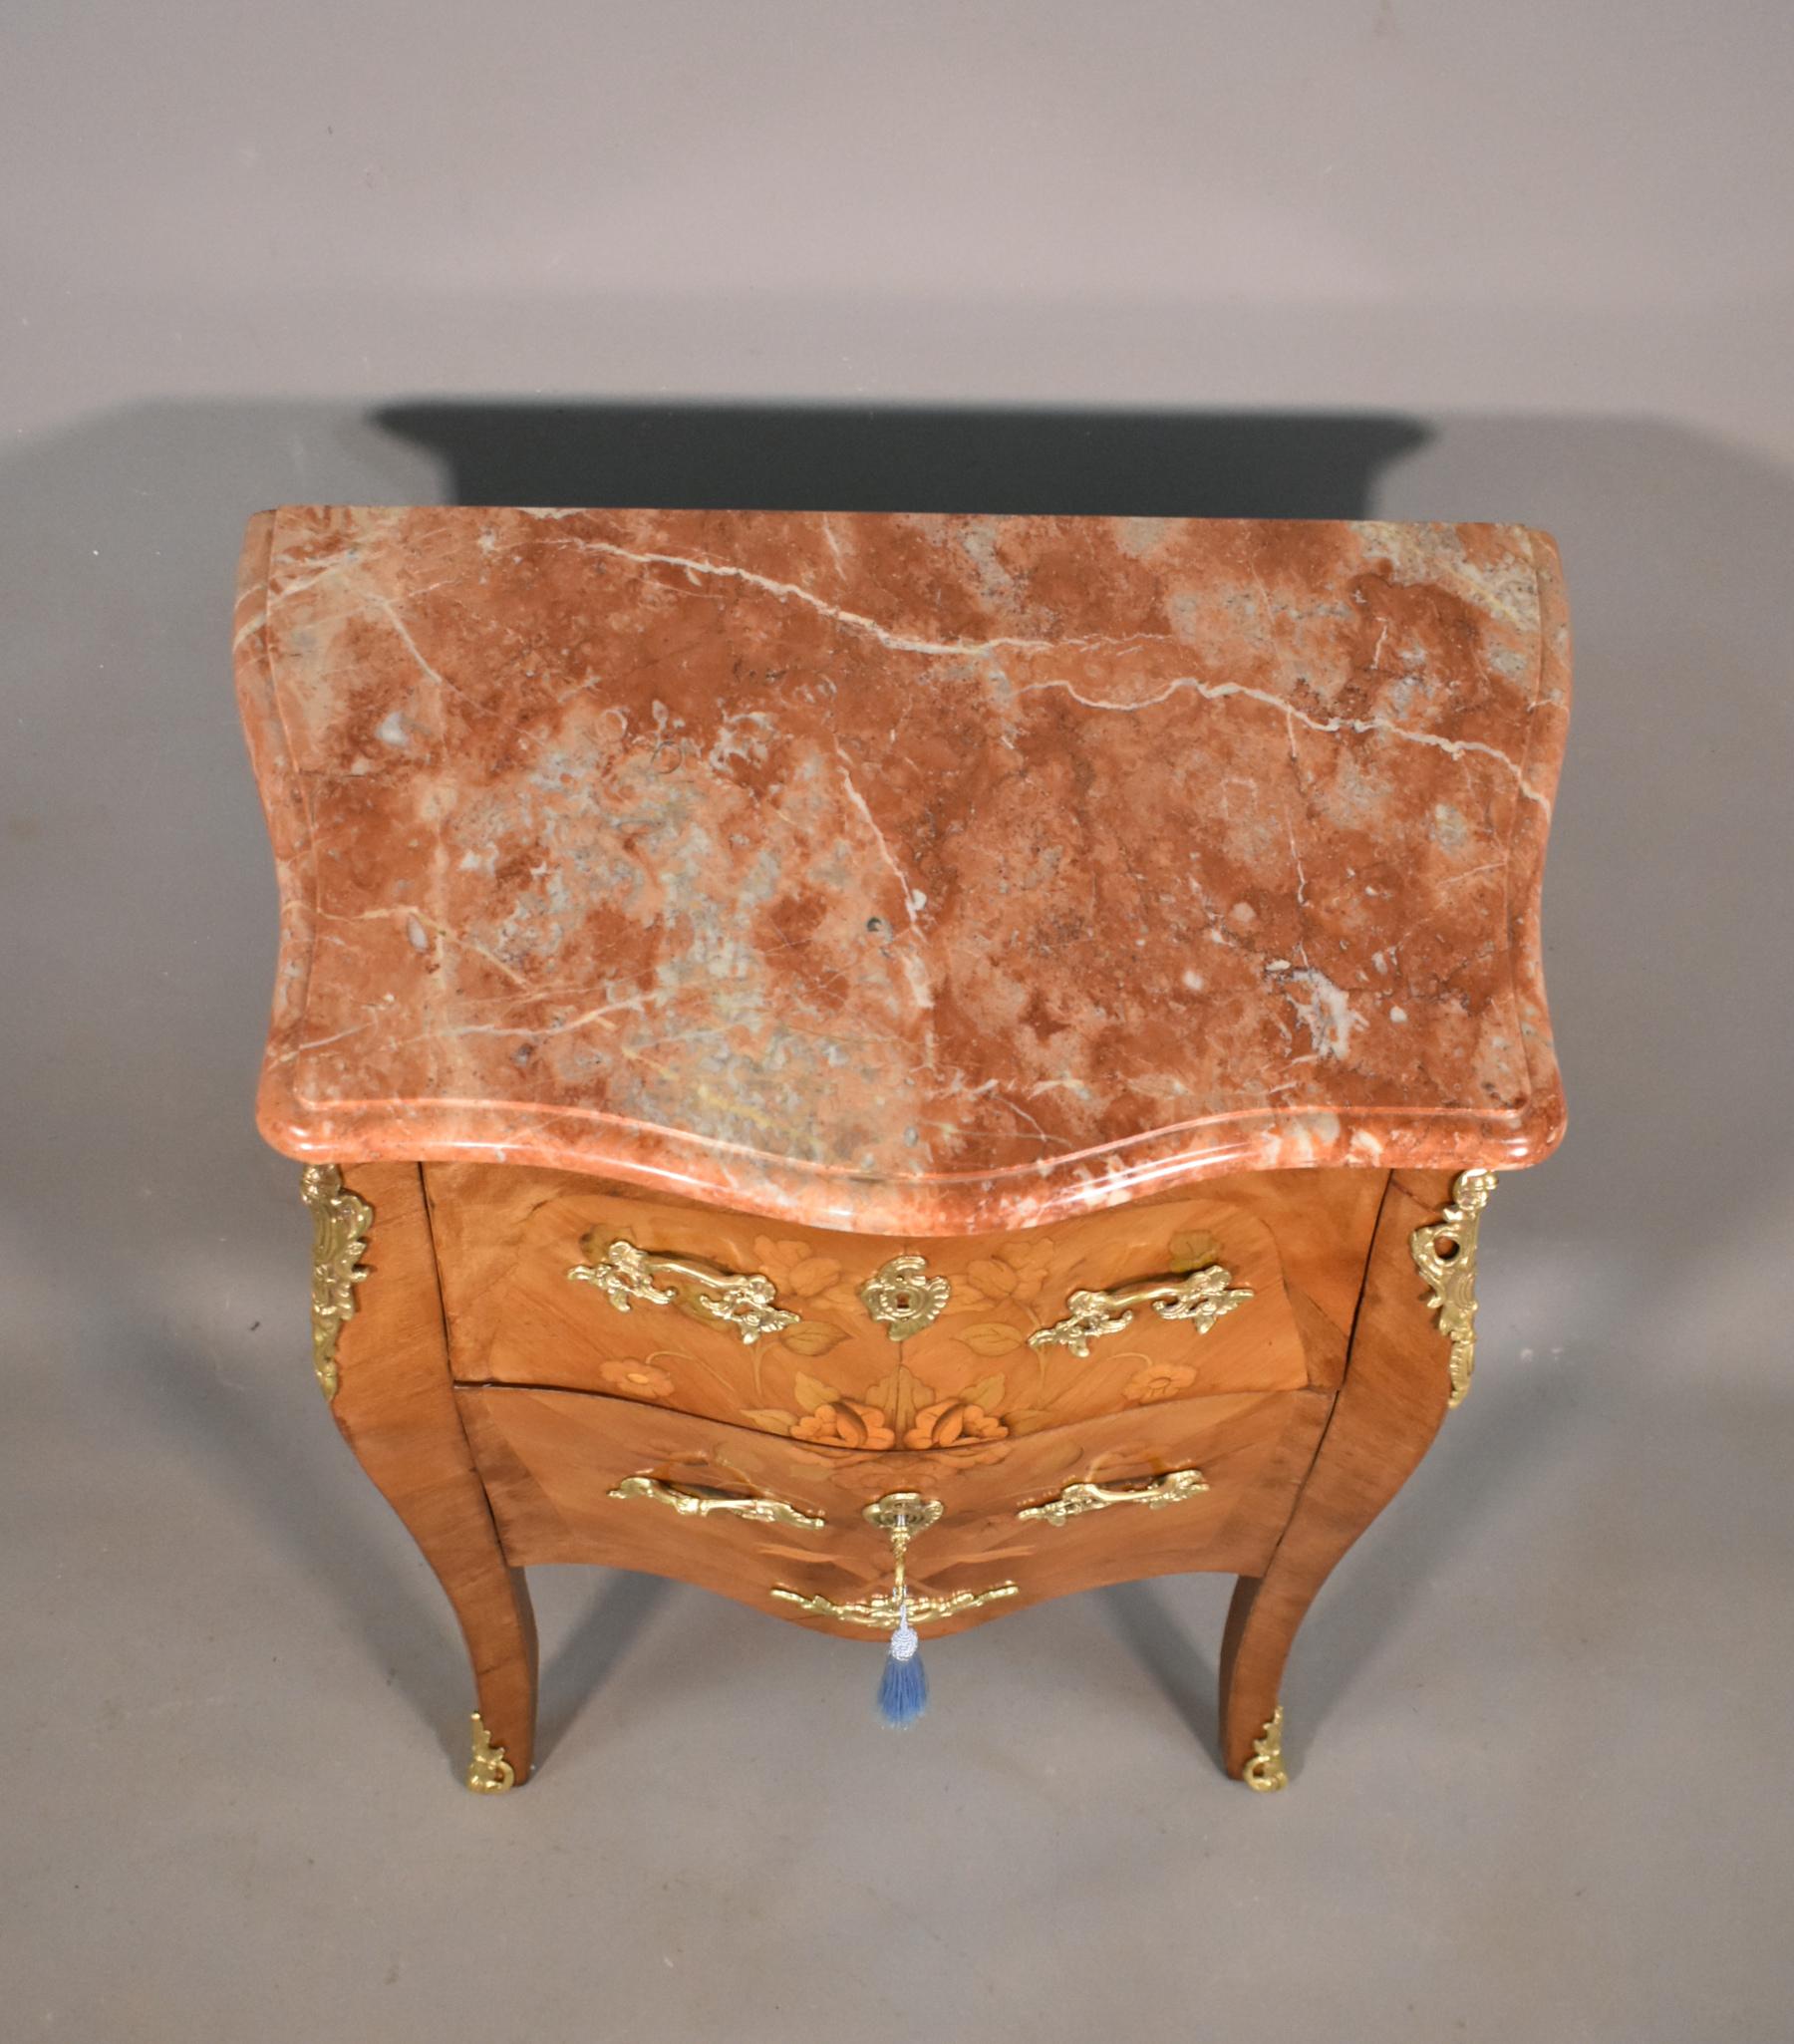 Antique French Louis XV Revival Marquetry Bombe Commode 19C For Sale 3